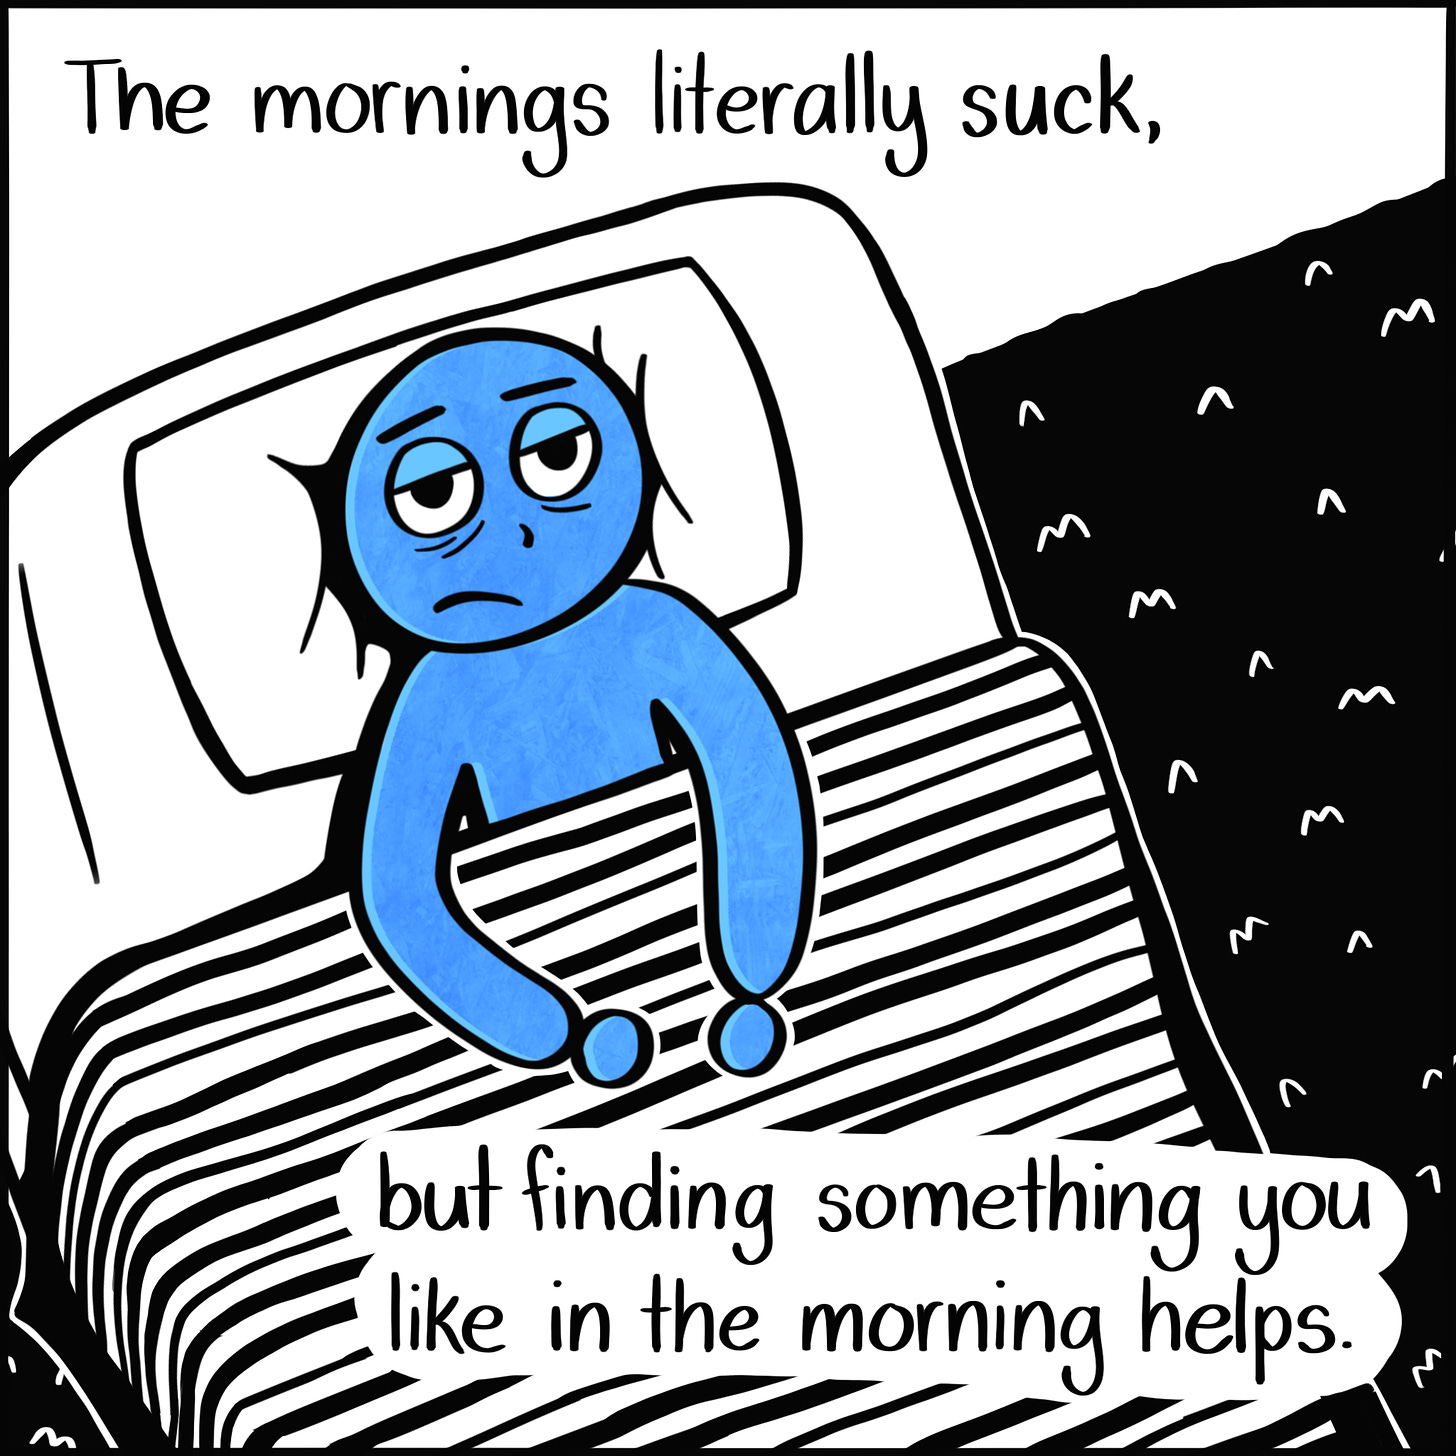 Caption: The mornings literally suck, but finding something you like in the morning helps. Image: Blue person lying in bed, bags under their eyes, clearly not happy to be awake.